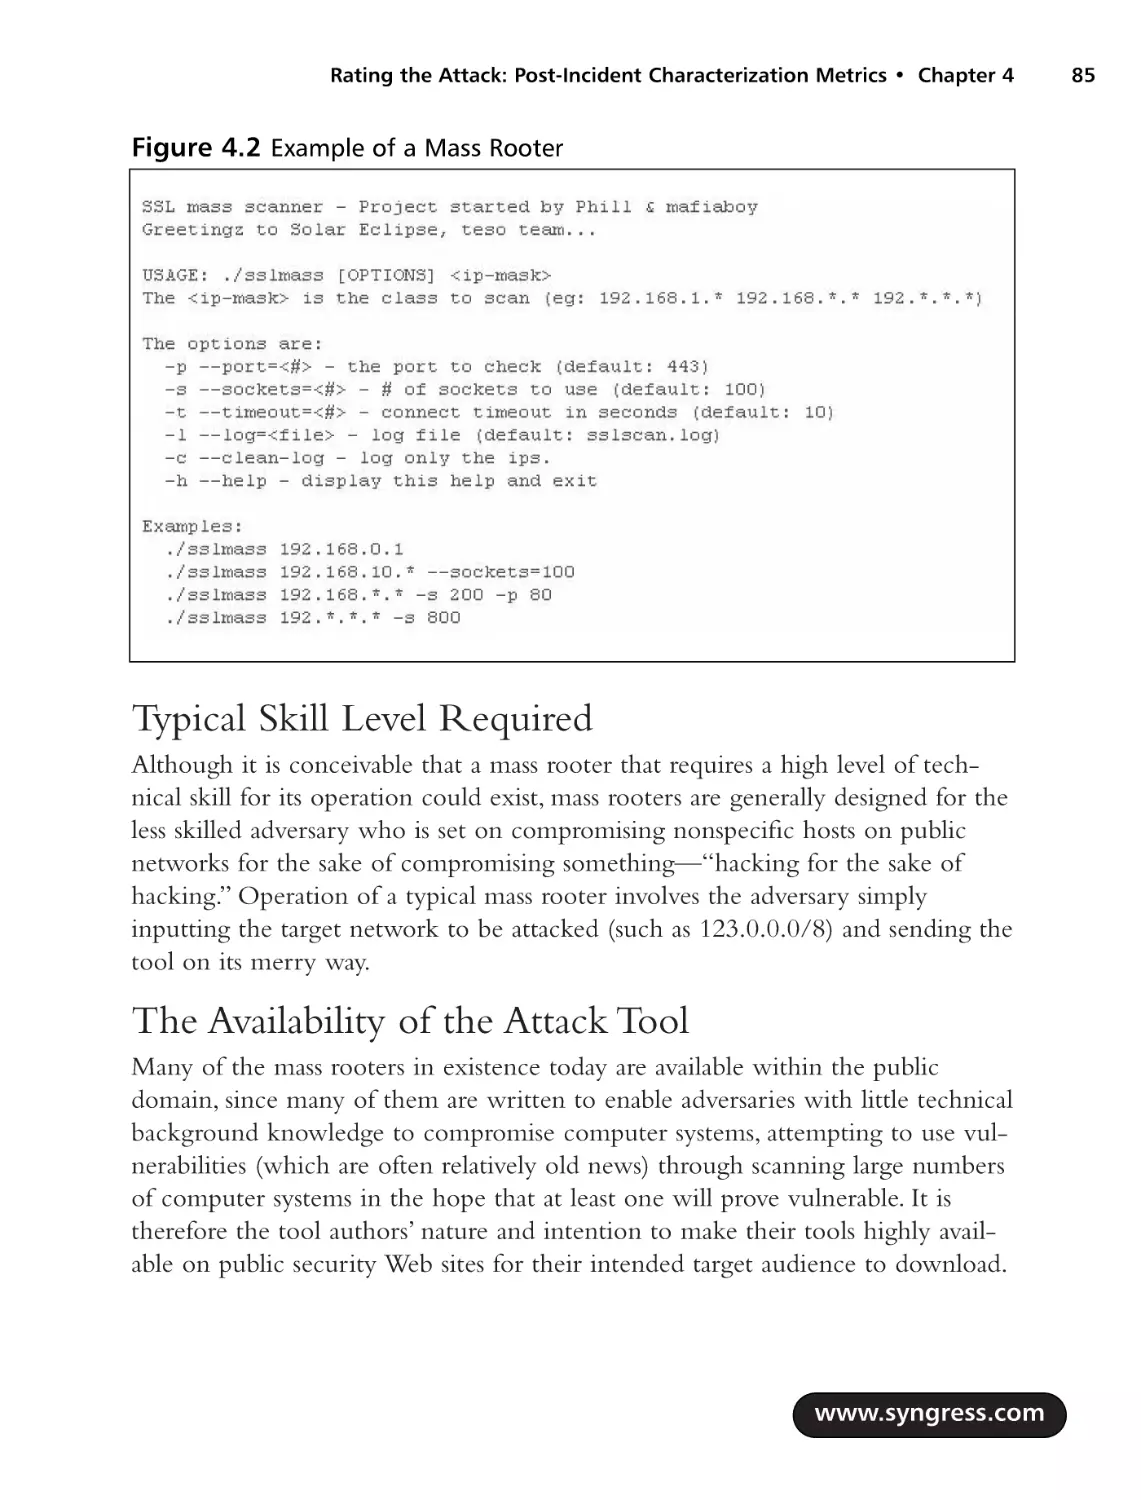 Typical Skill Level Required
The Availability of the Attack Tool